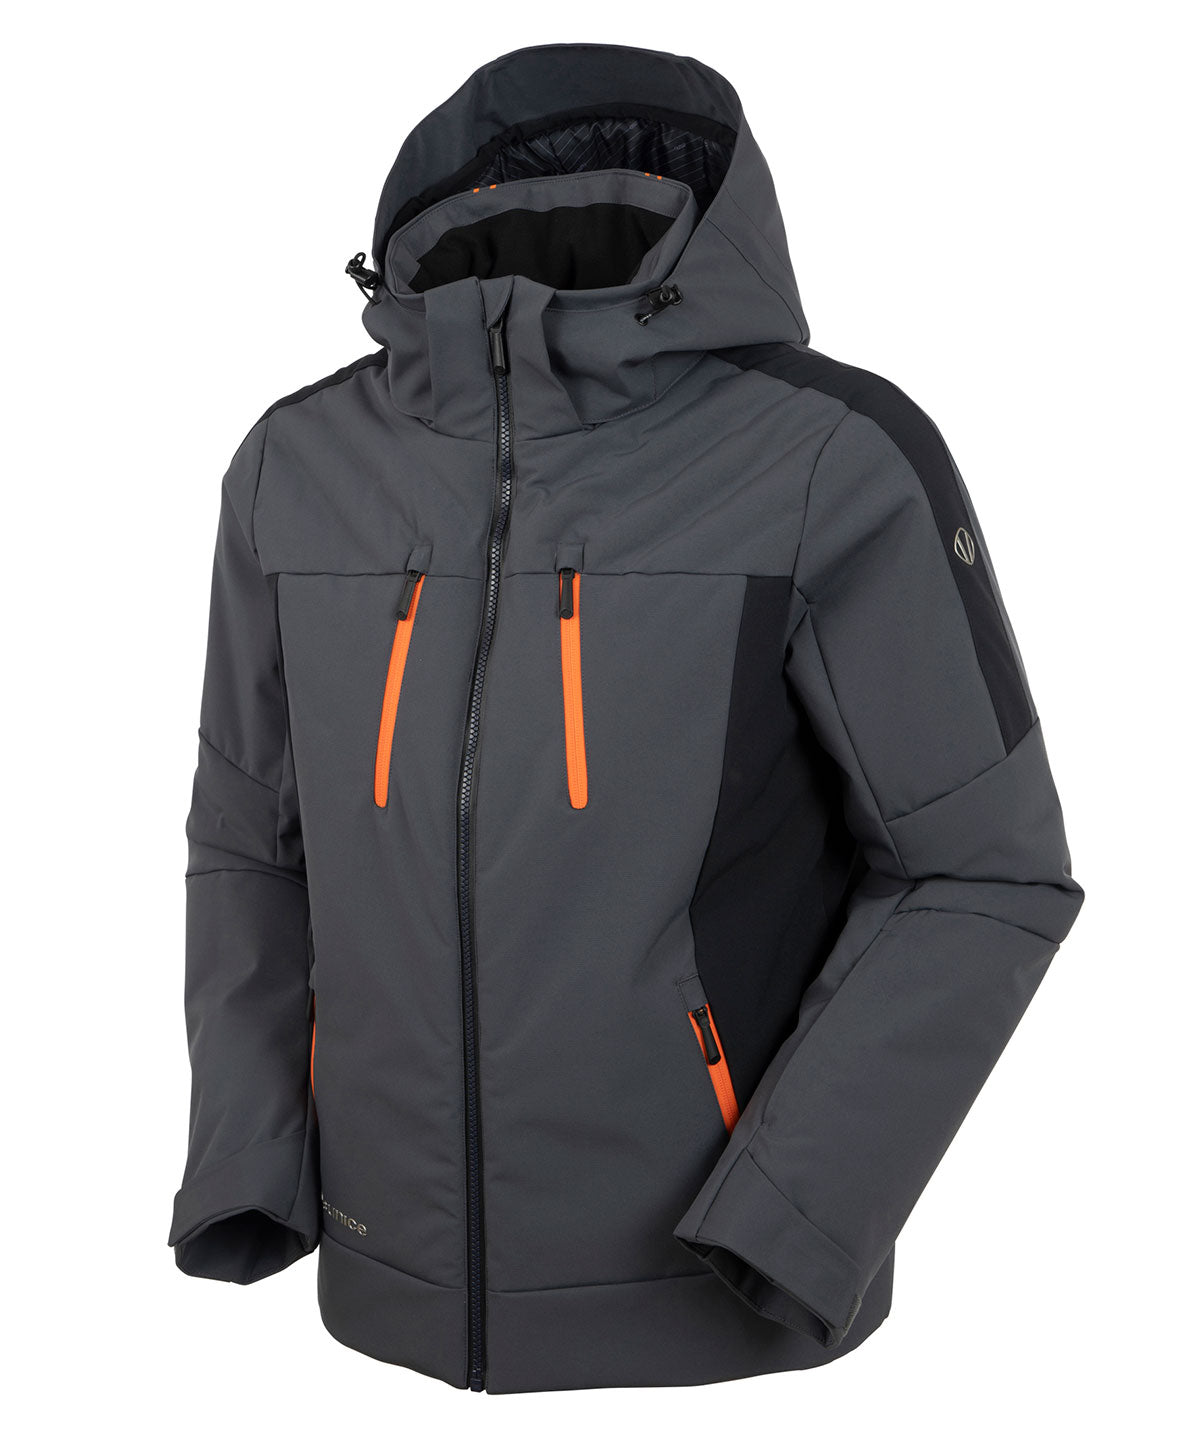 Sunice Men'S Paul Waterproof Stretch Jacket With Removable Hood - Charcoal/Black - M